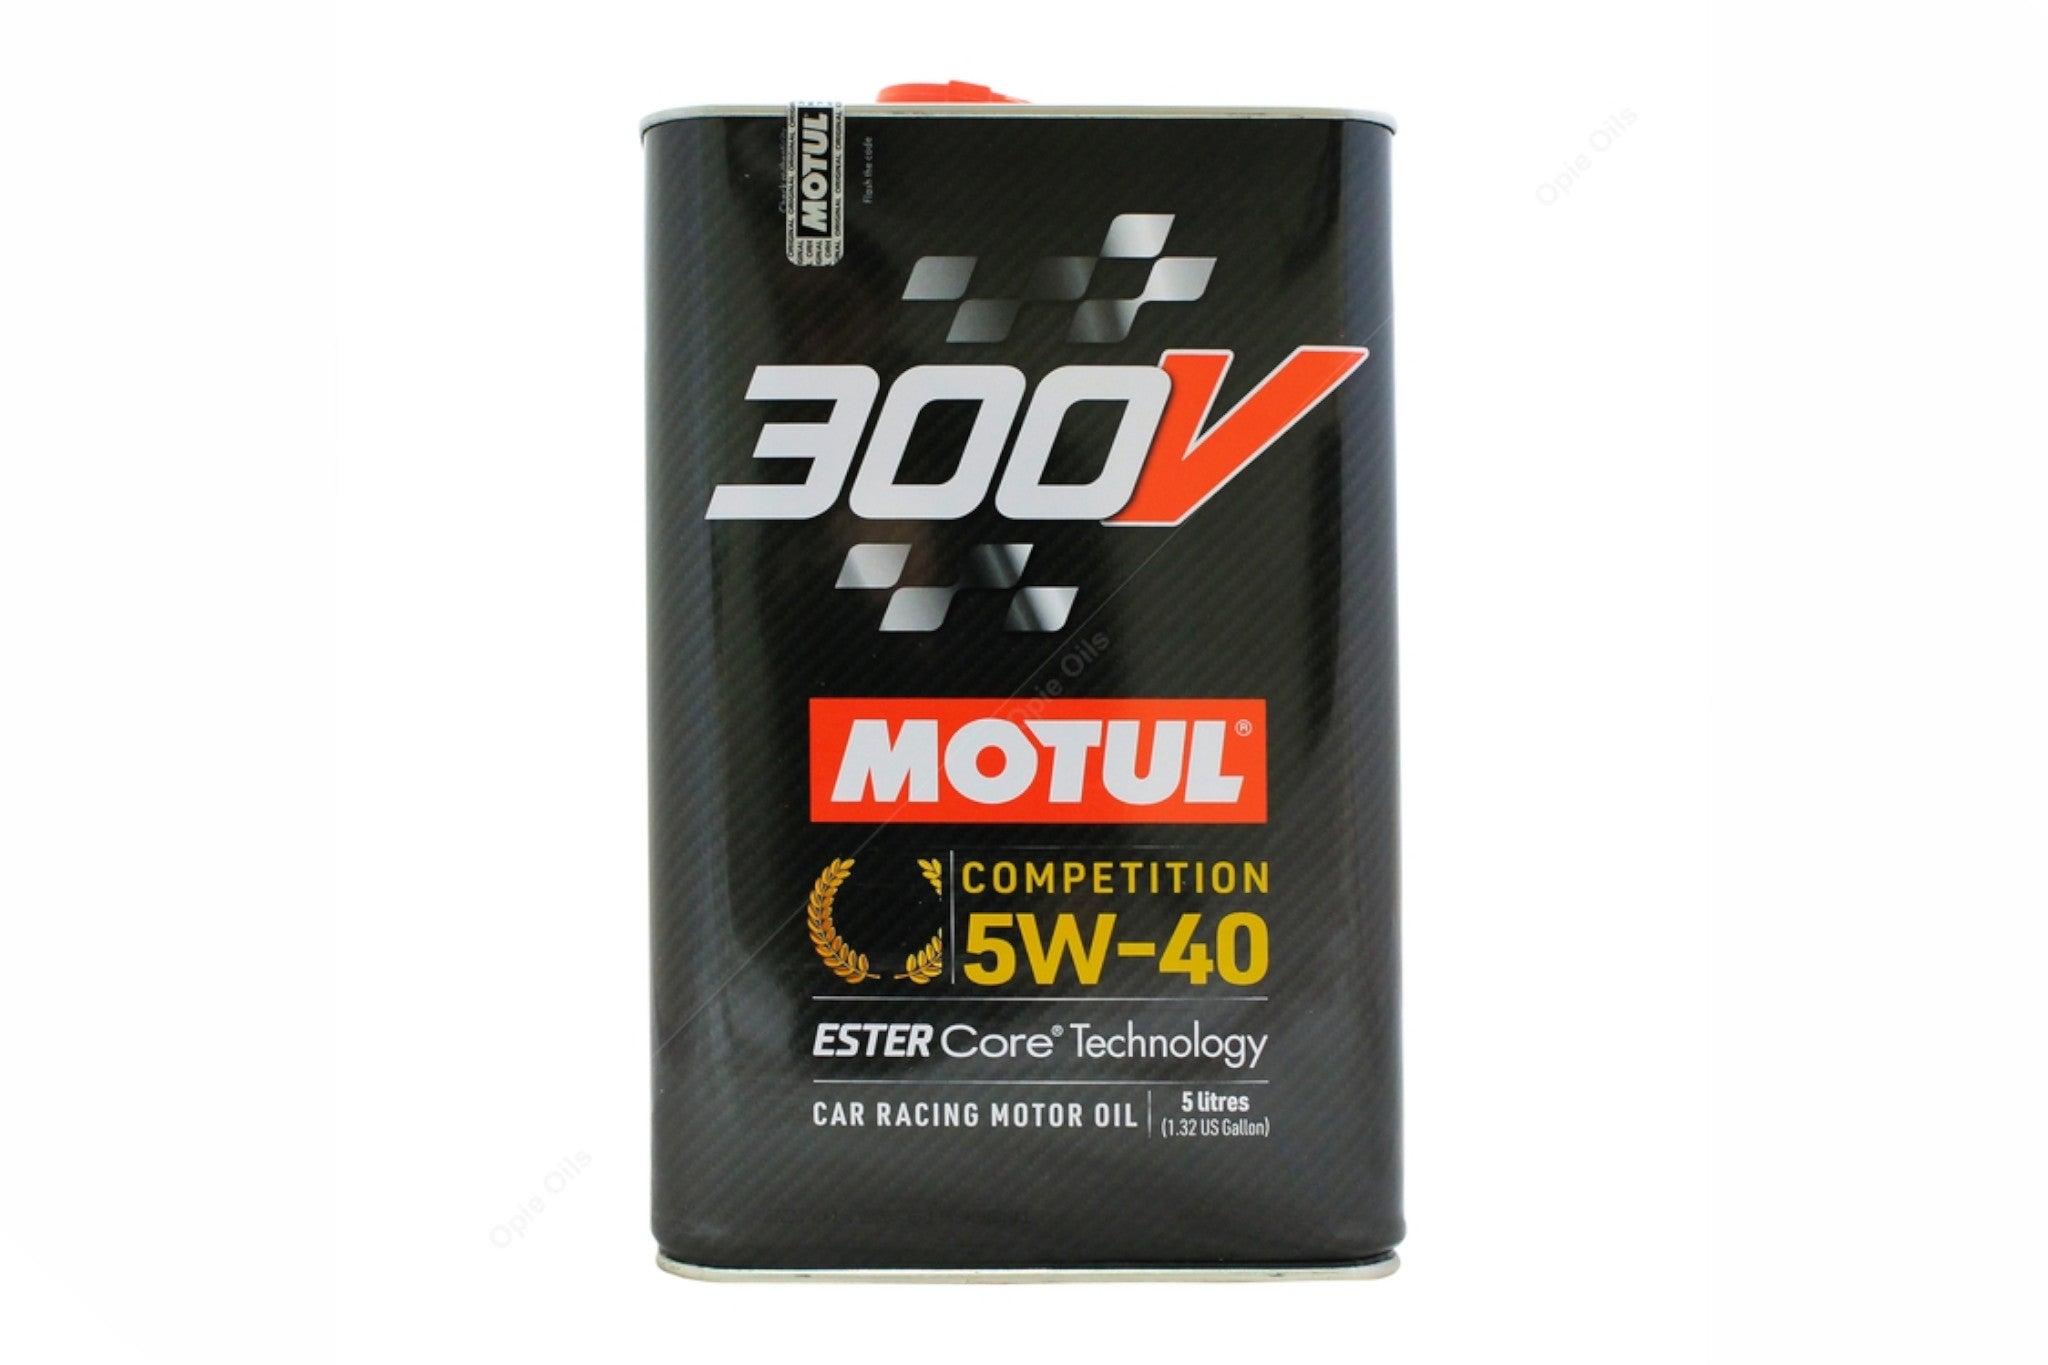 Motul 300v Competition 5w40 Fully Synthetic Car Engine Oil - Evolve Automotive